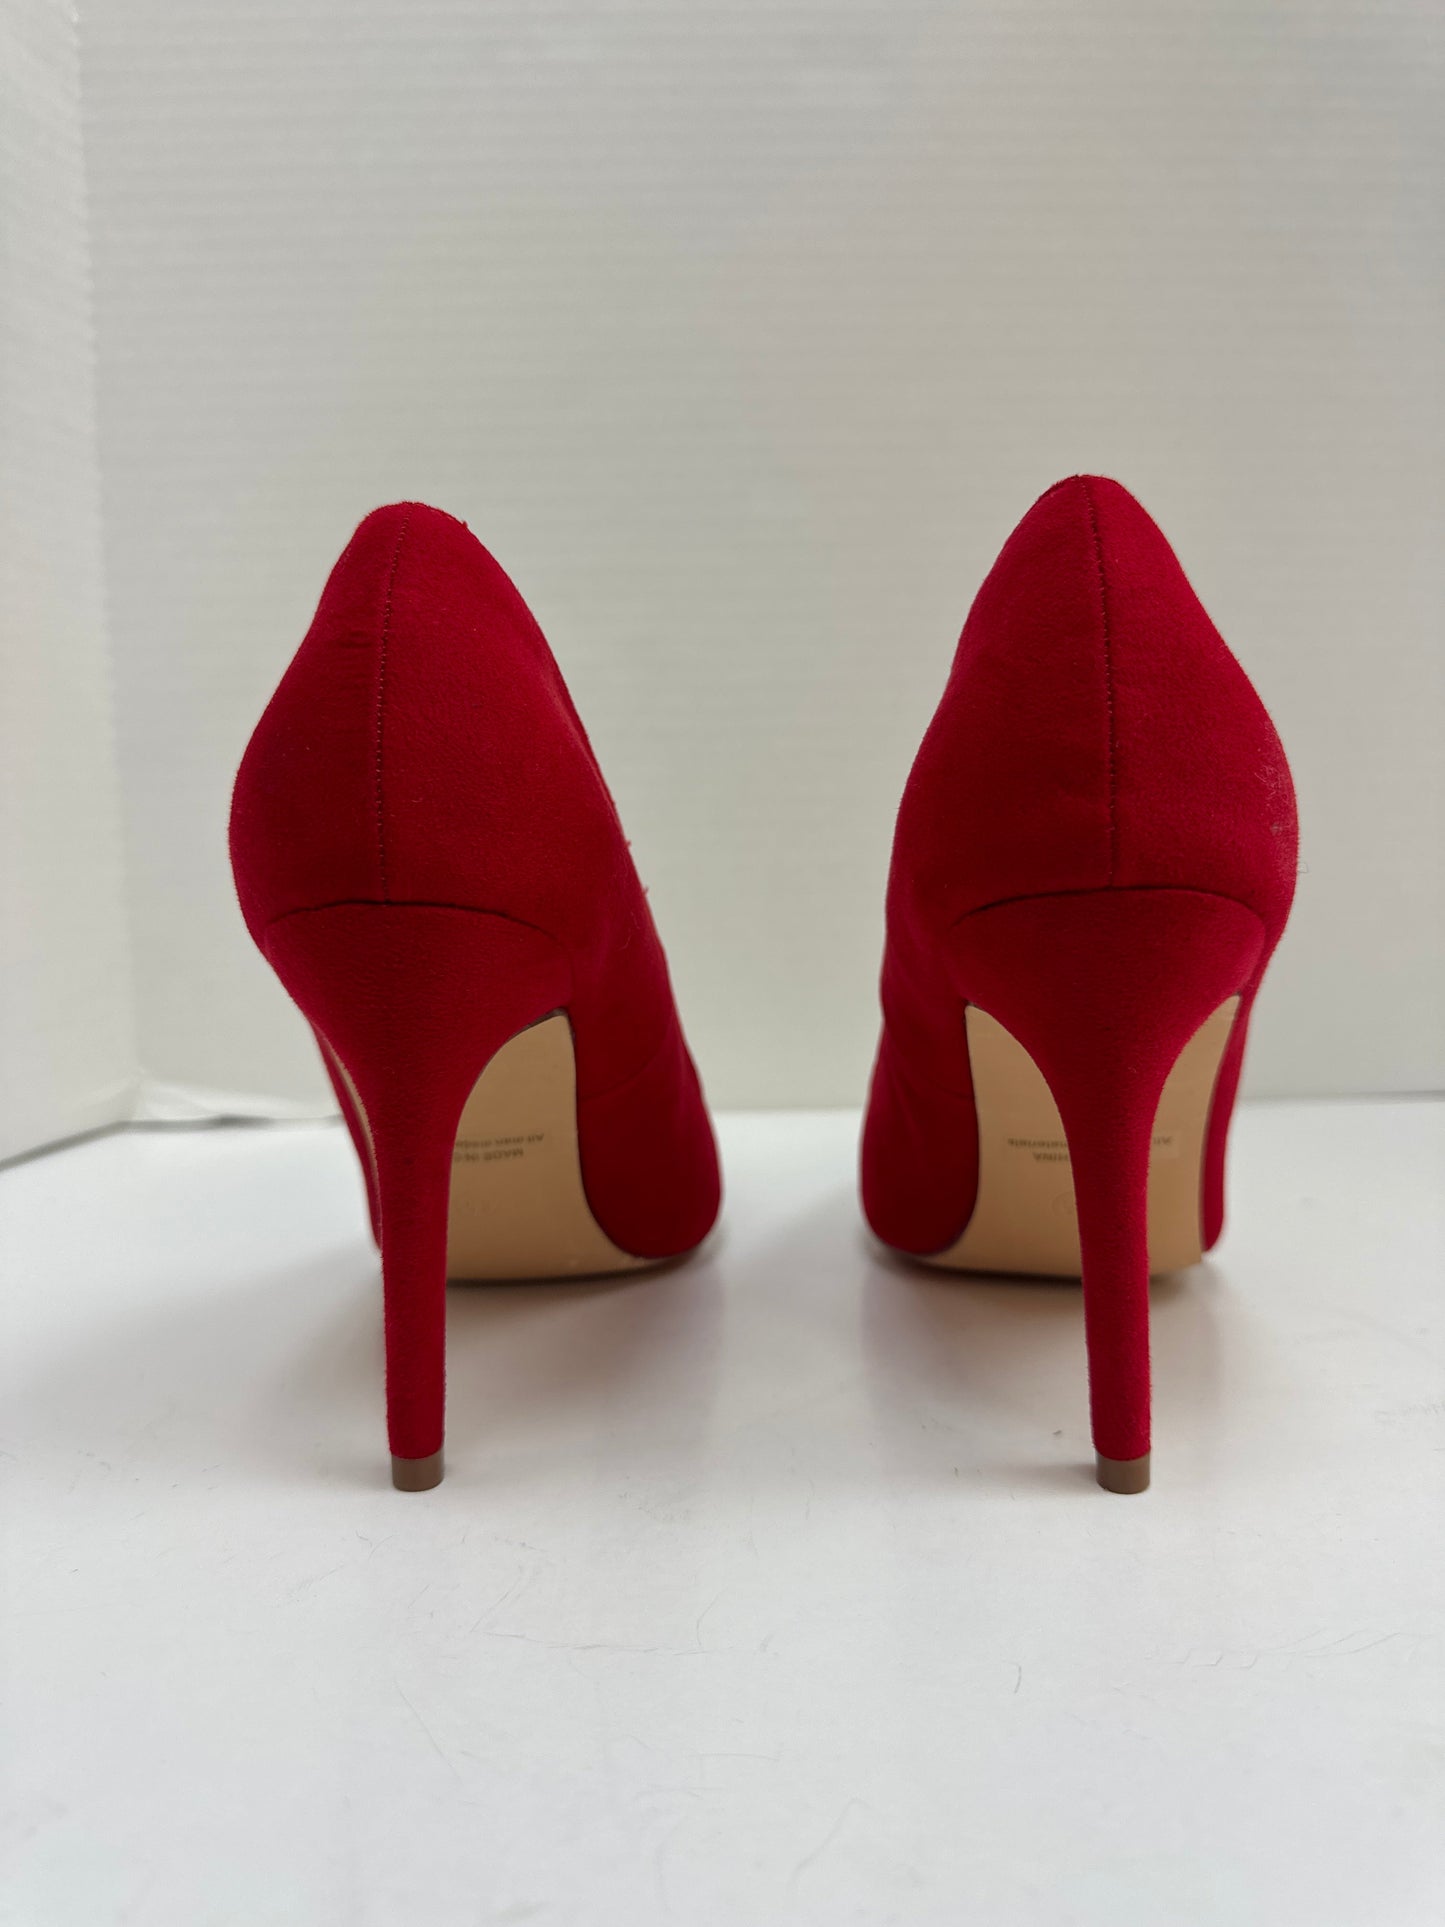 Shoes Heels Stiletto By Cmf  Size: 8.5